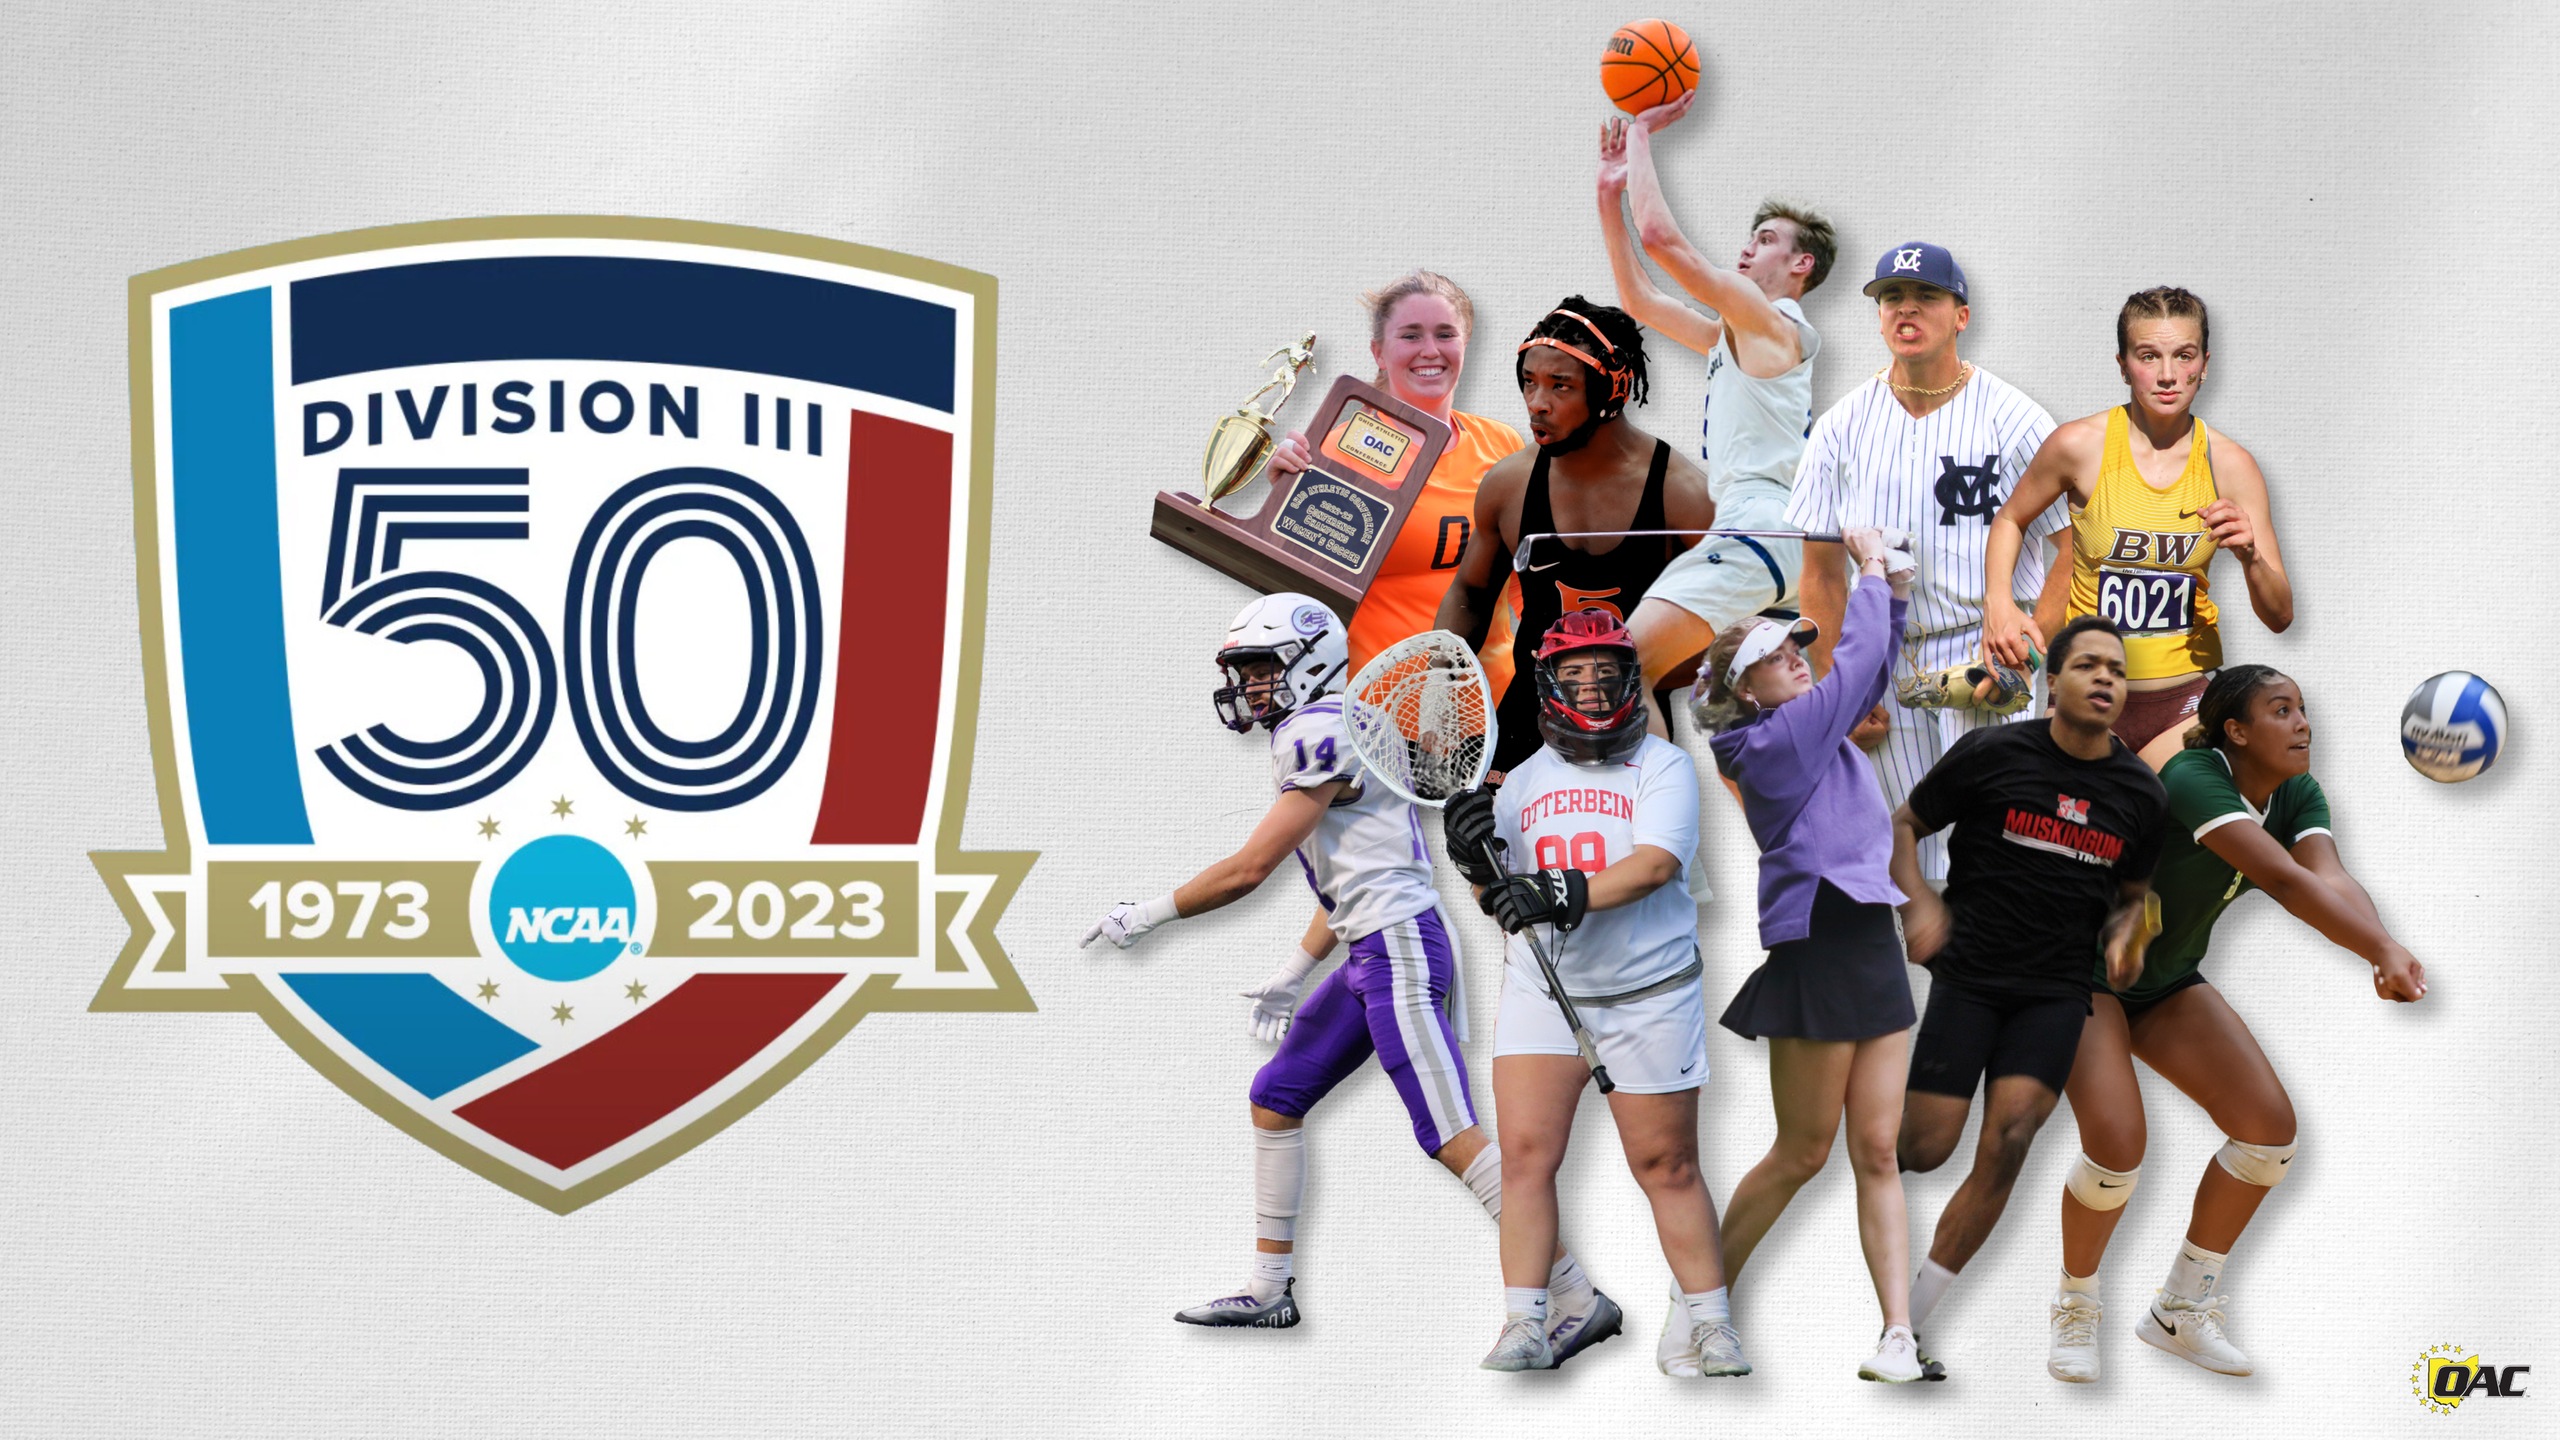 Celebrating the 50th Year of Division III!